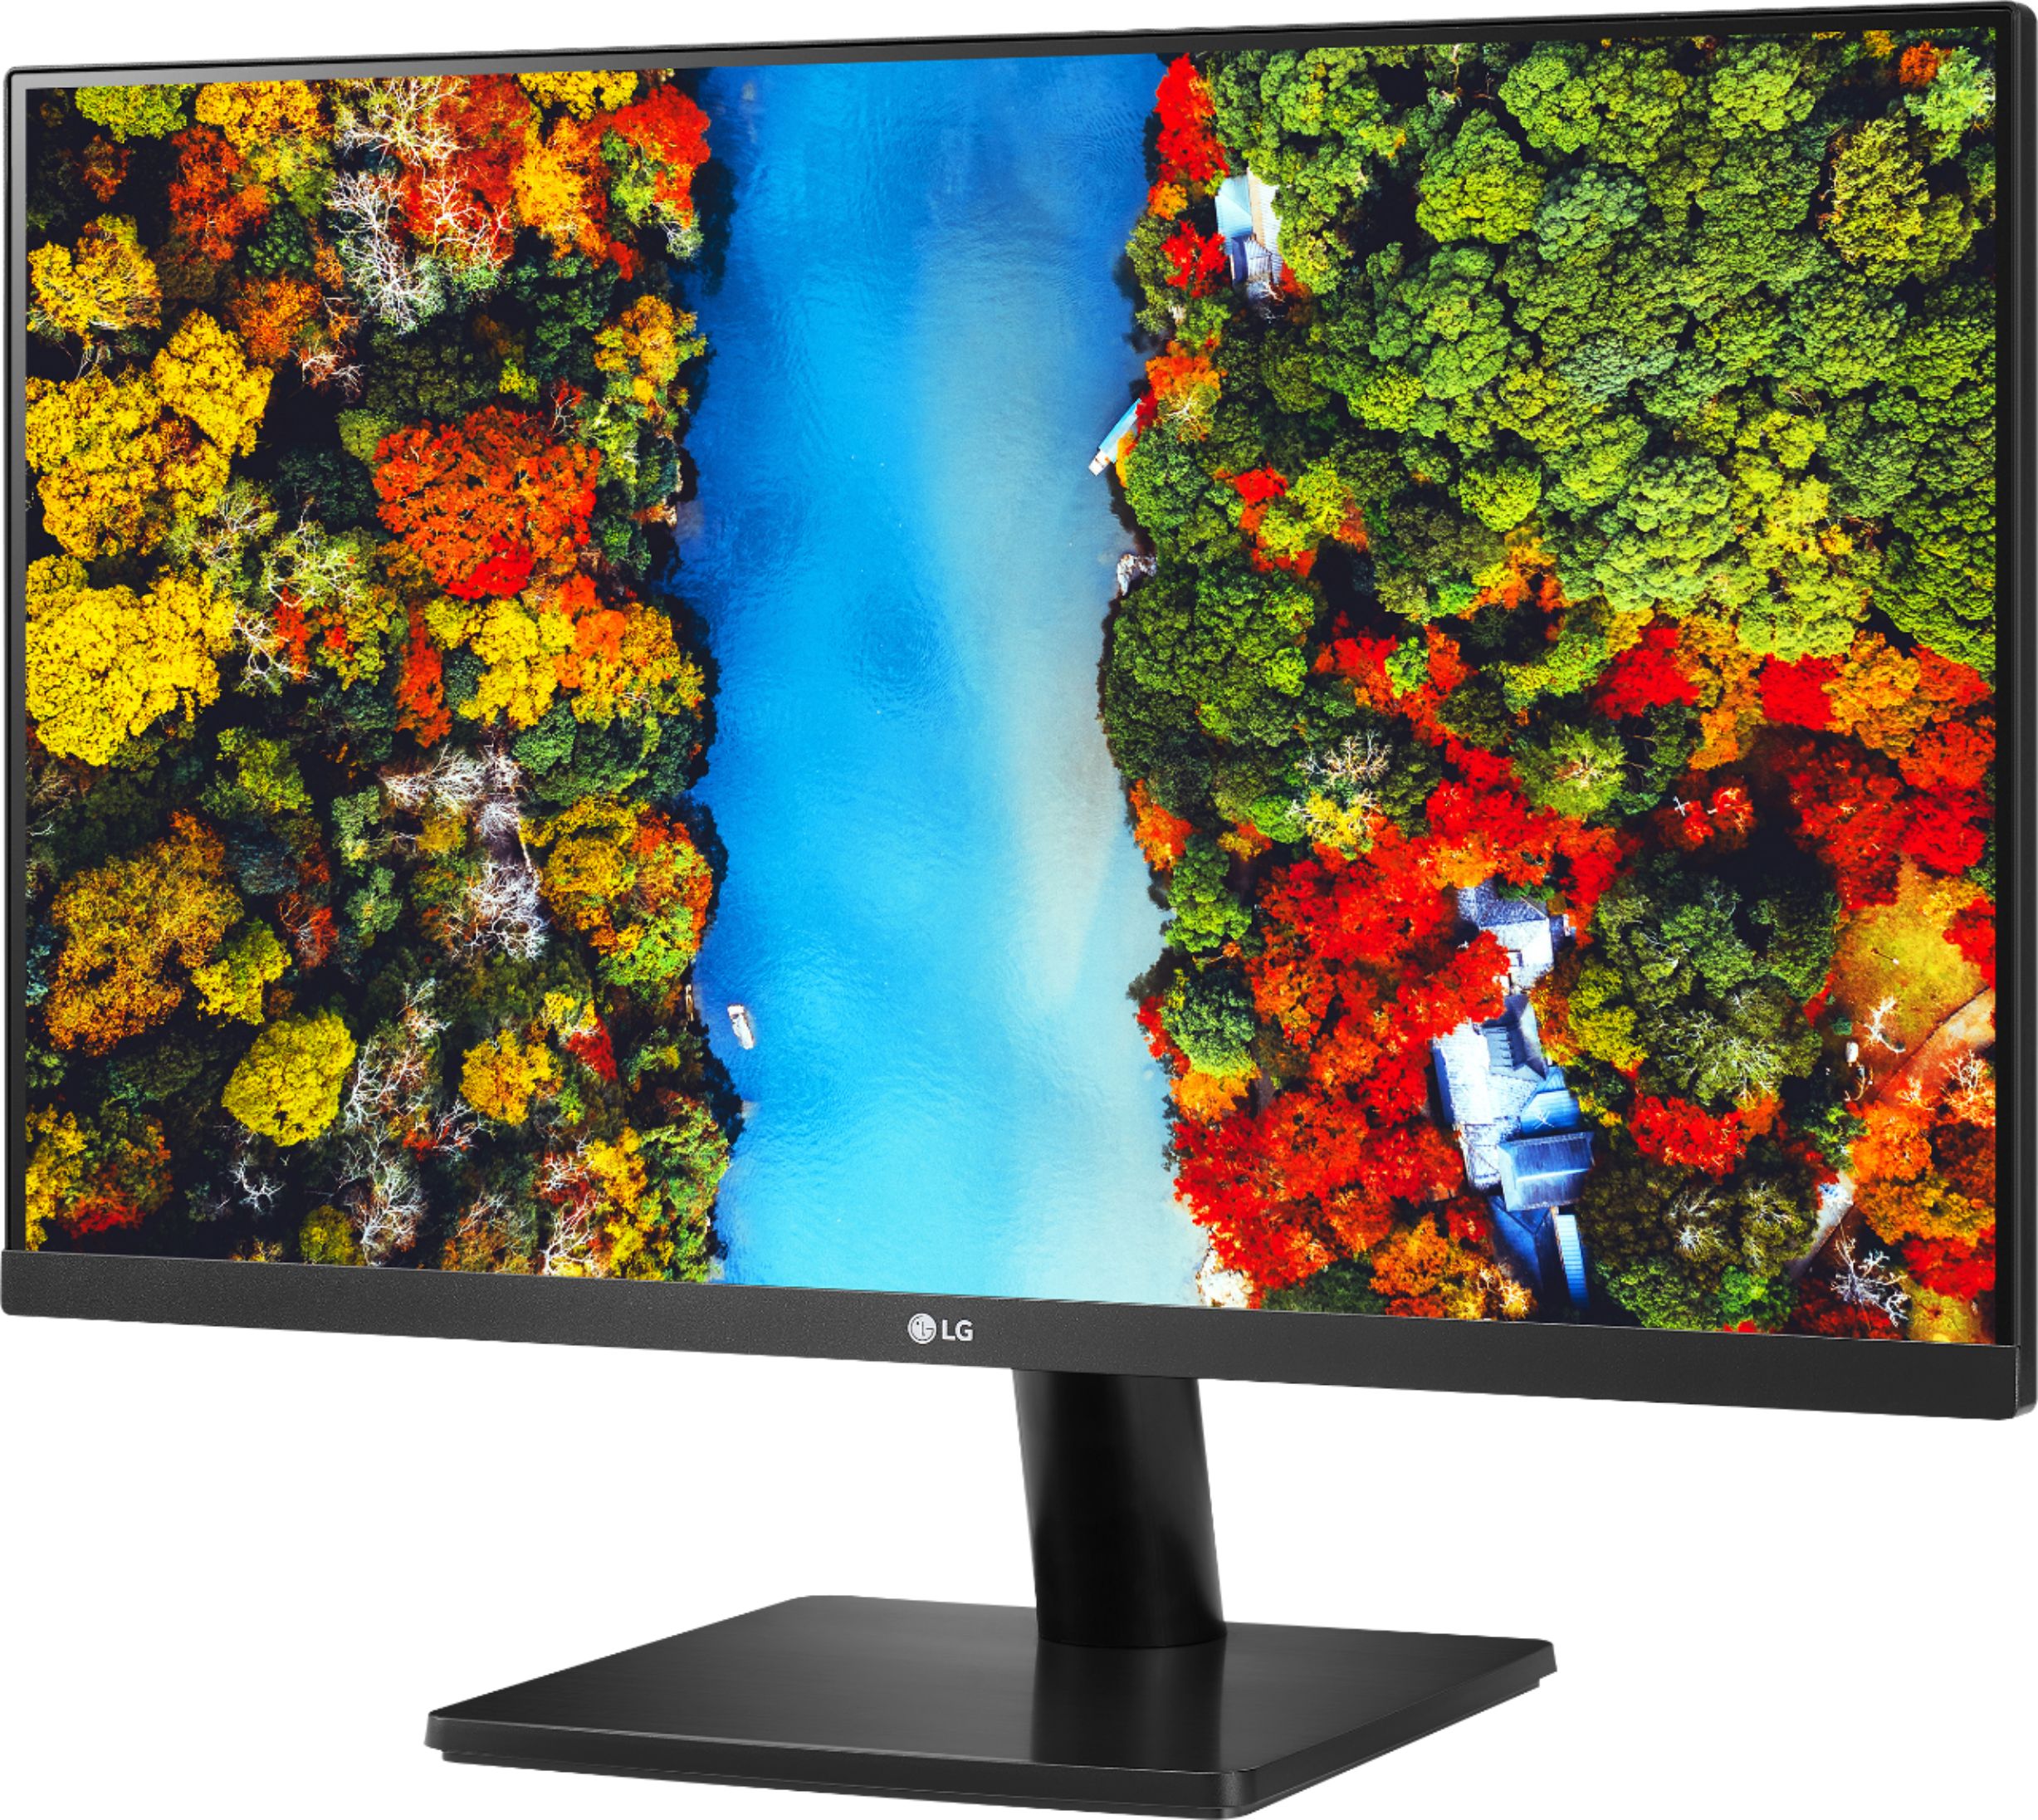 Left View: Mobile Pixels - DUEX Max DS 14.1" IPS LCD Monitor - Black